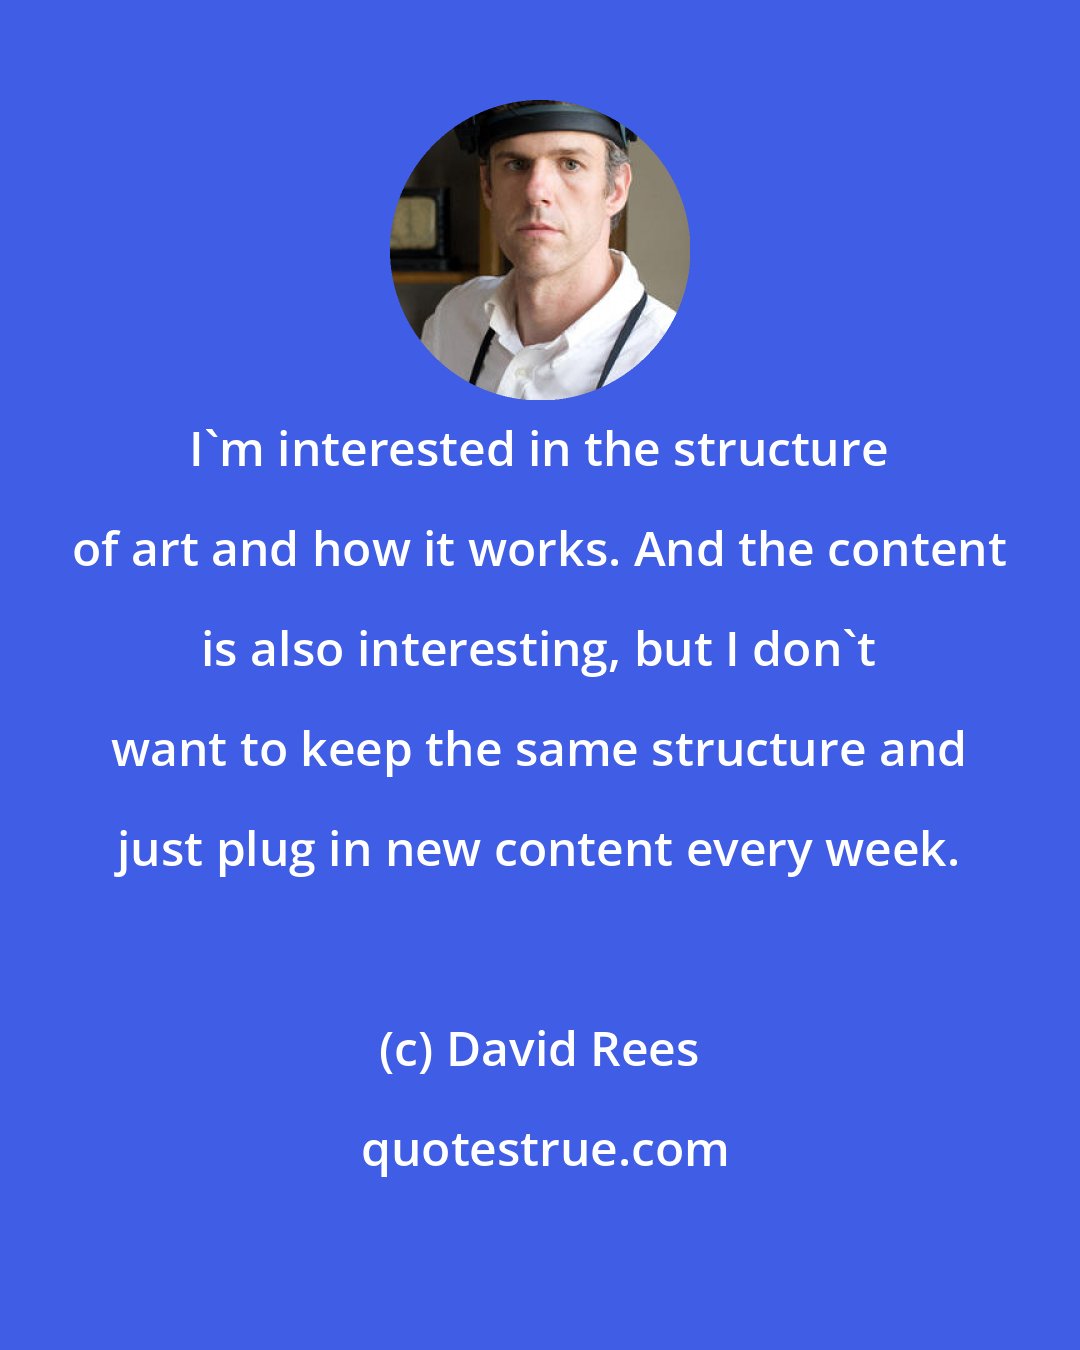 David Rees: I'm interested in the structure of art and how it works. And the content is also interesting, but I don't want to keep the same structure and just plug in new content every week.